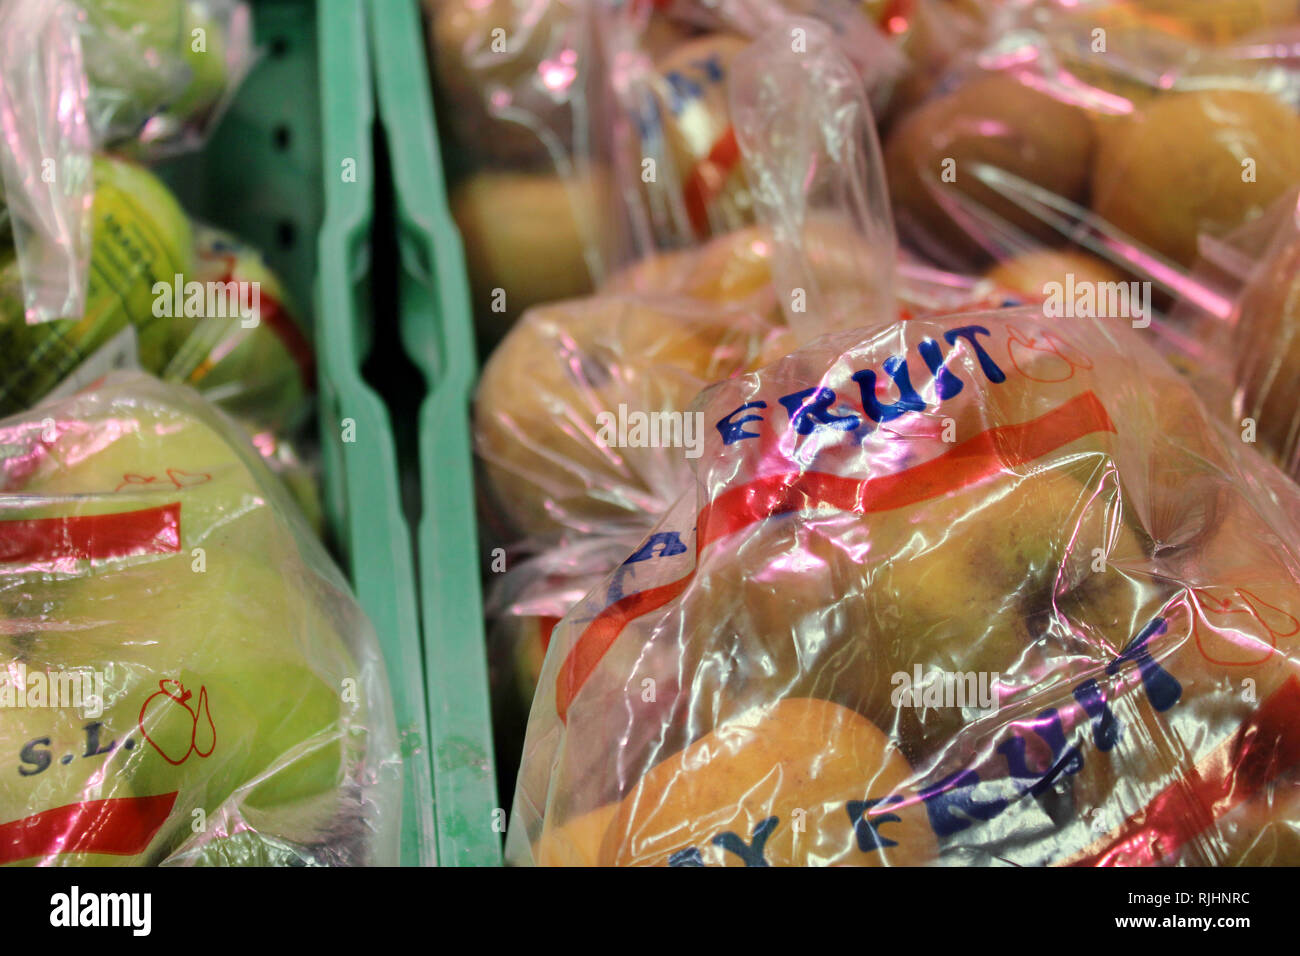 Display of fruits wrapped in plastic bags on a supermarket Stock Photo